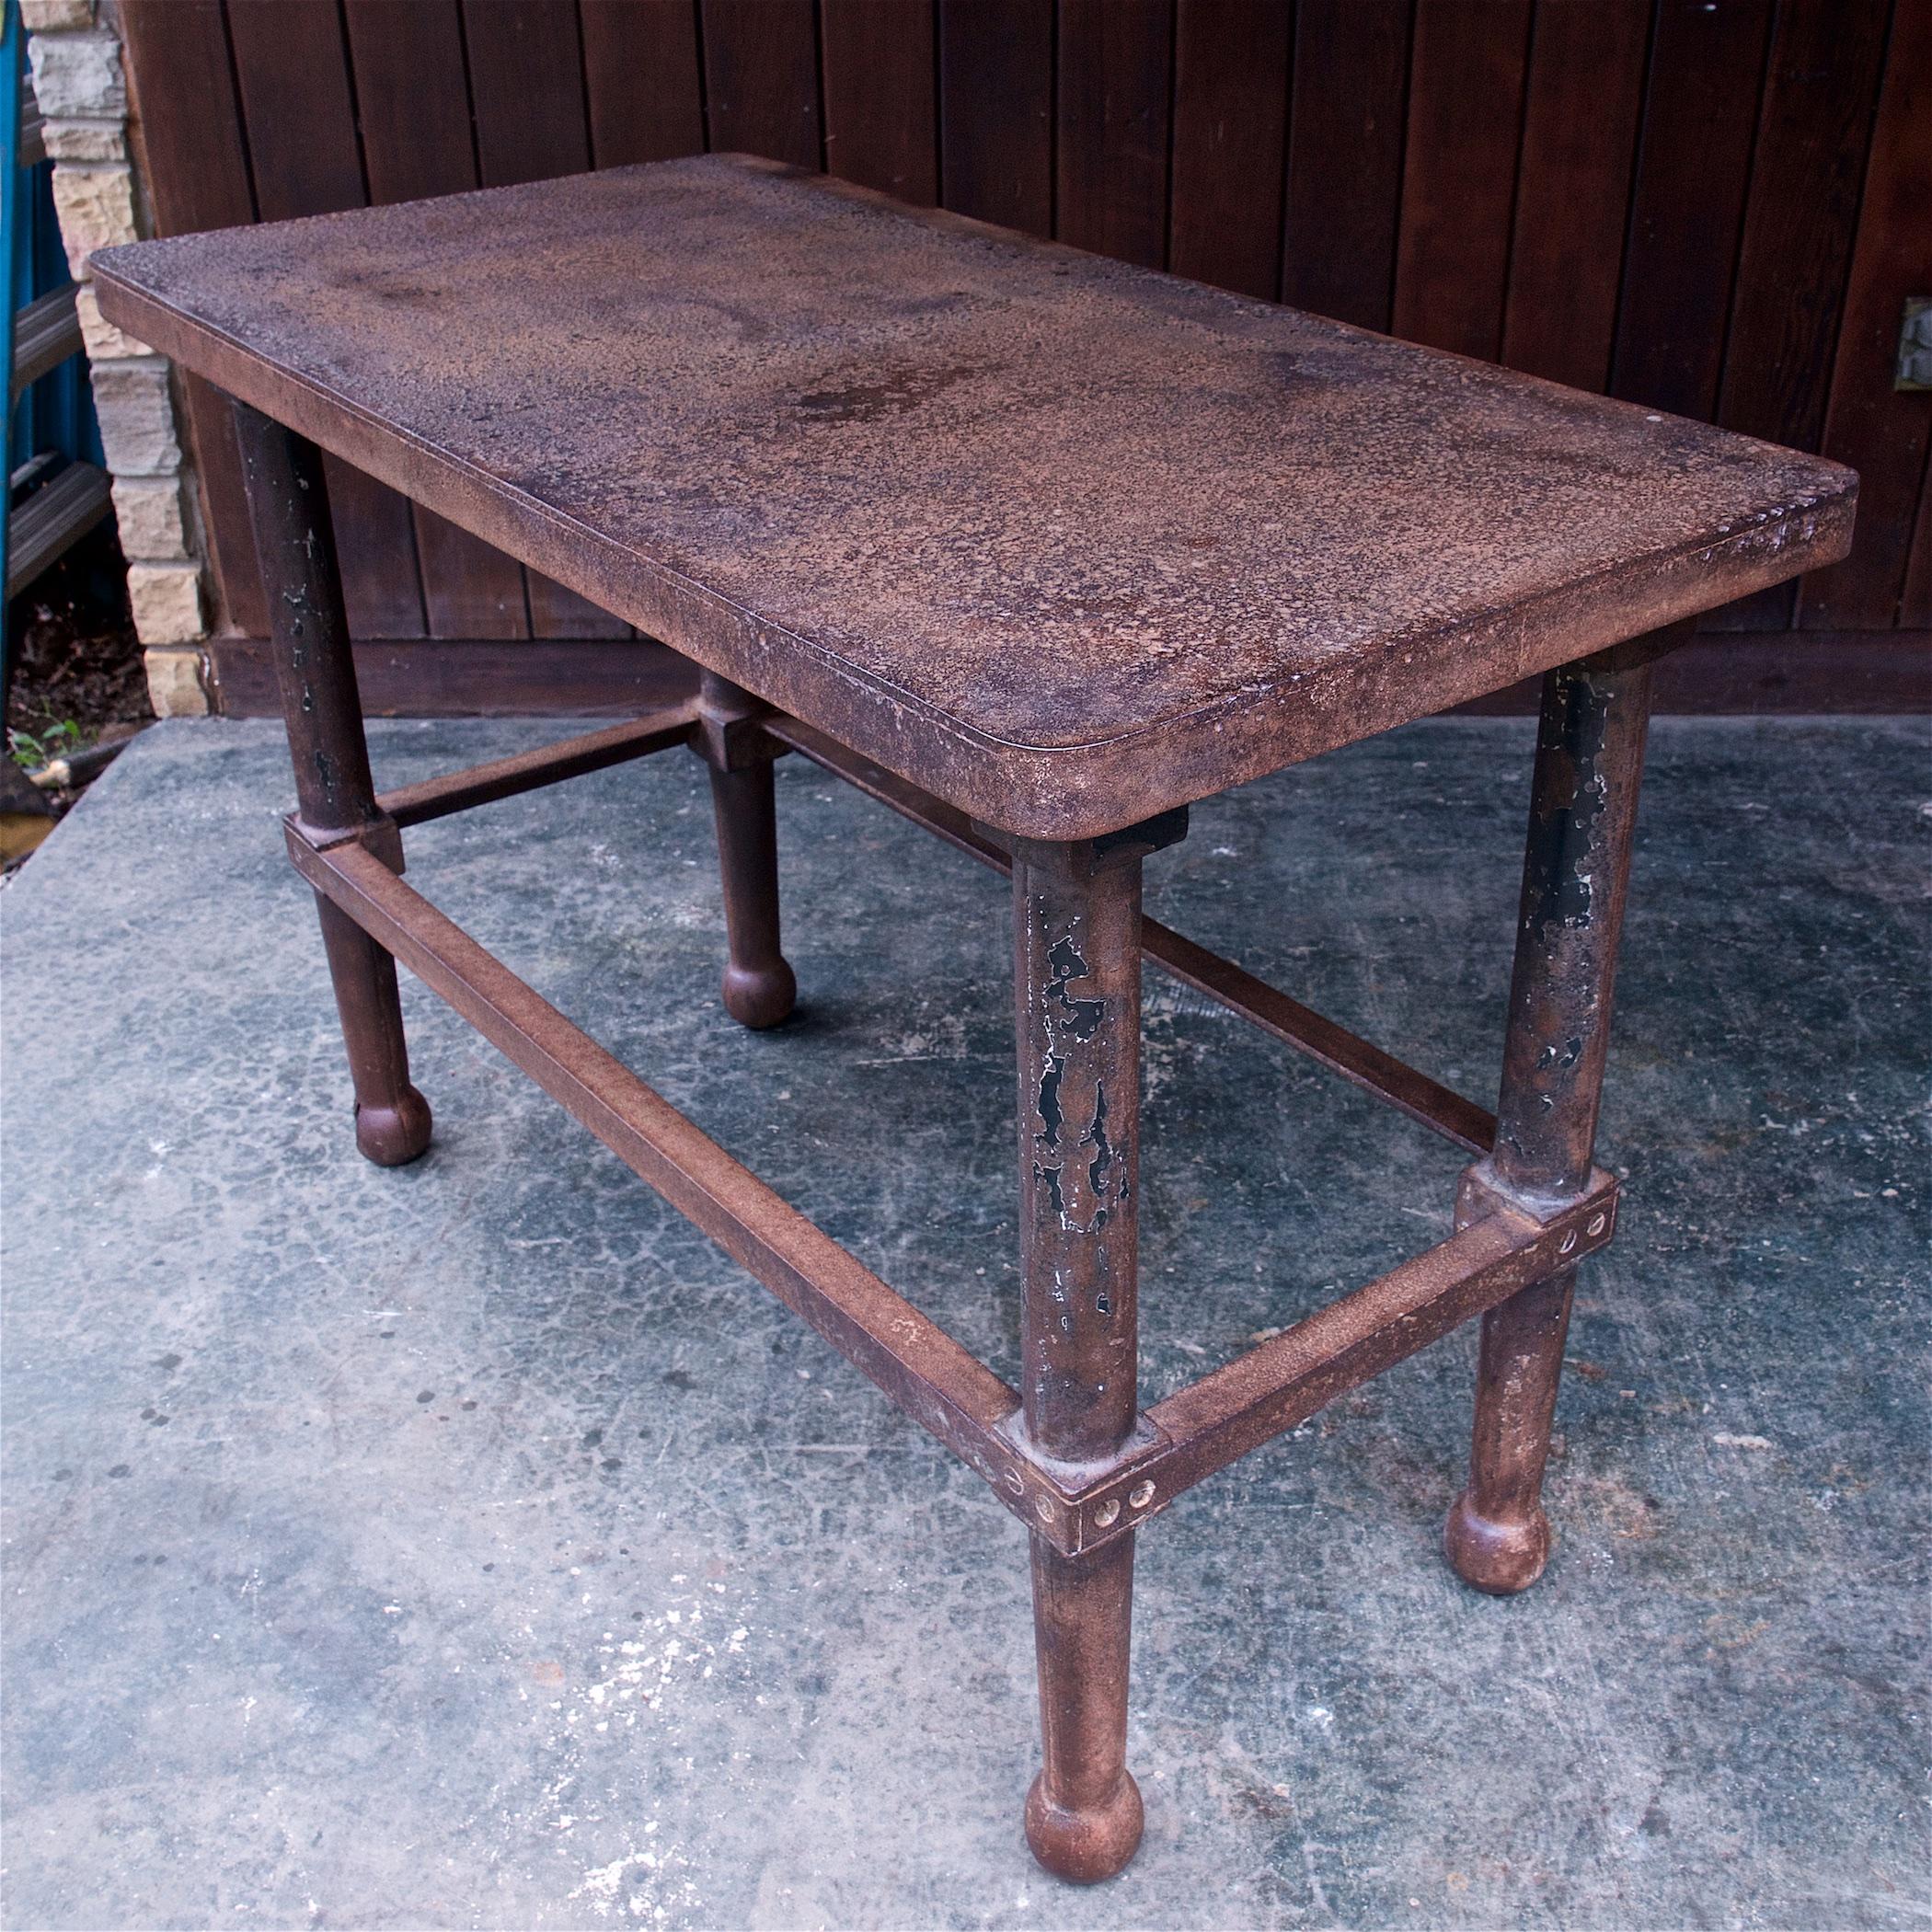 Hand-Crafted 1880s Victorian Mercantile Forged Iron Work Table Vintage Industrial Console For Sale